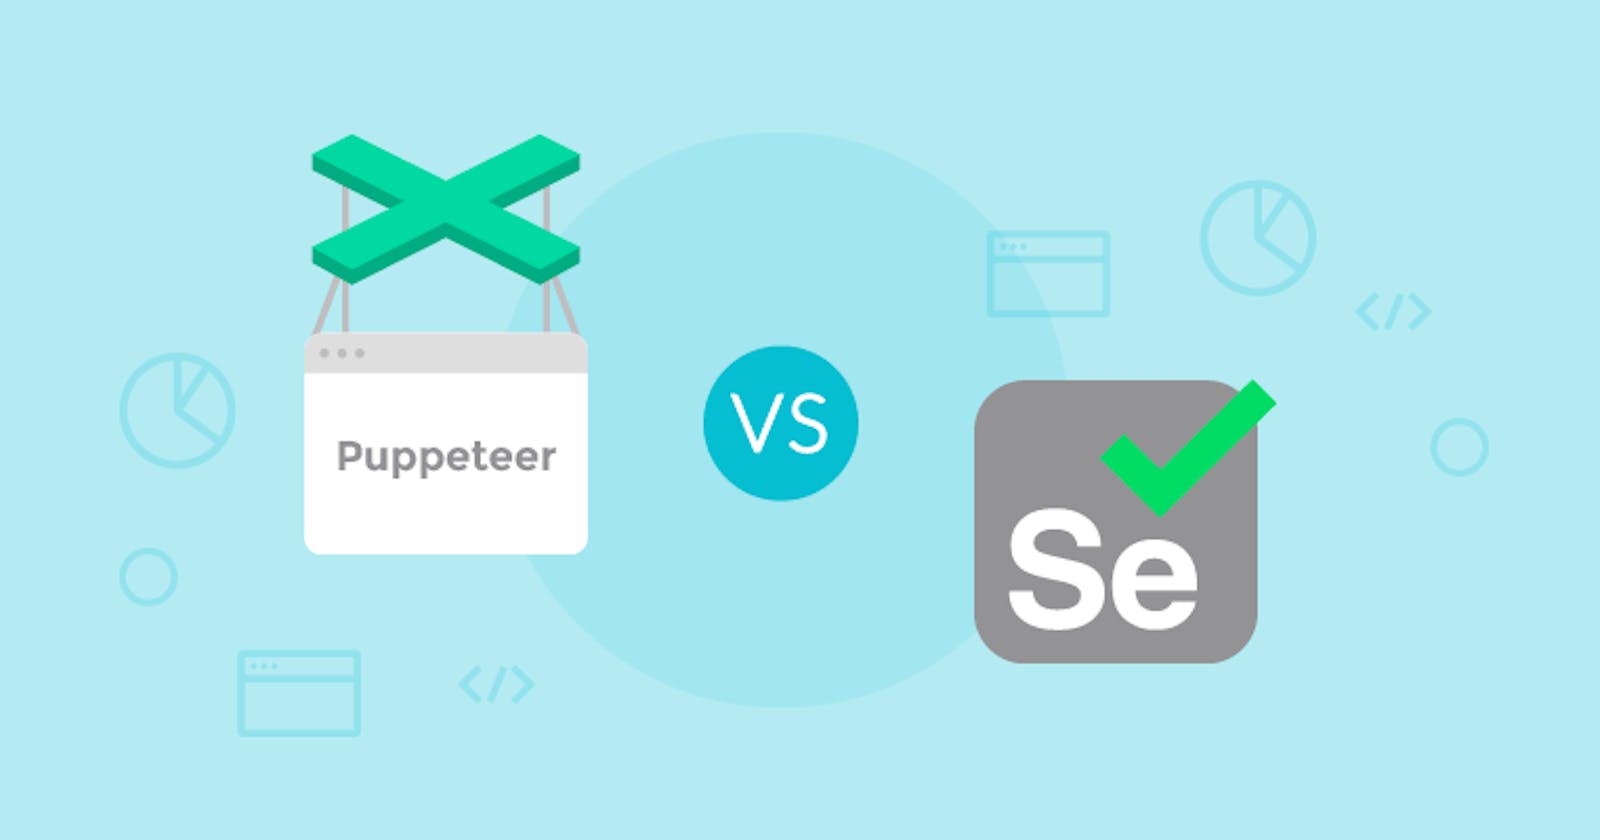 What to choose? Selenium or Puppeteer